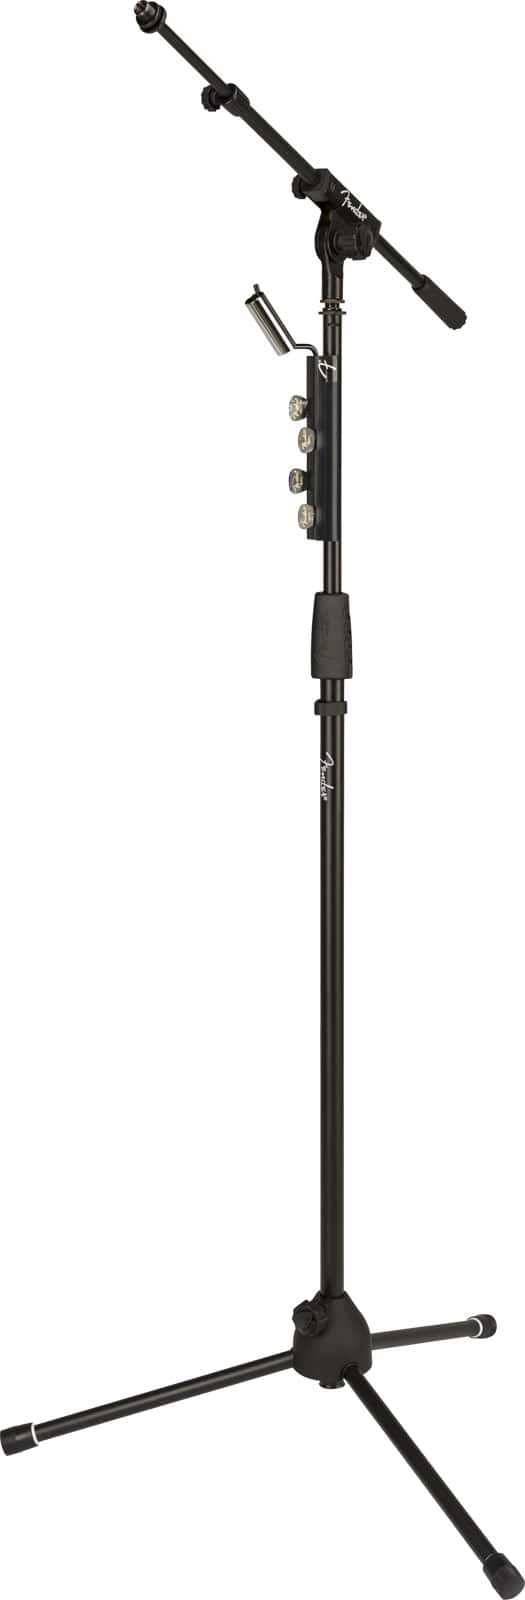 FENDER TELESCOPING BOOM MICROPHONE STAND